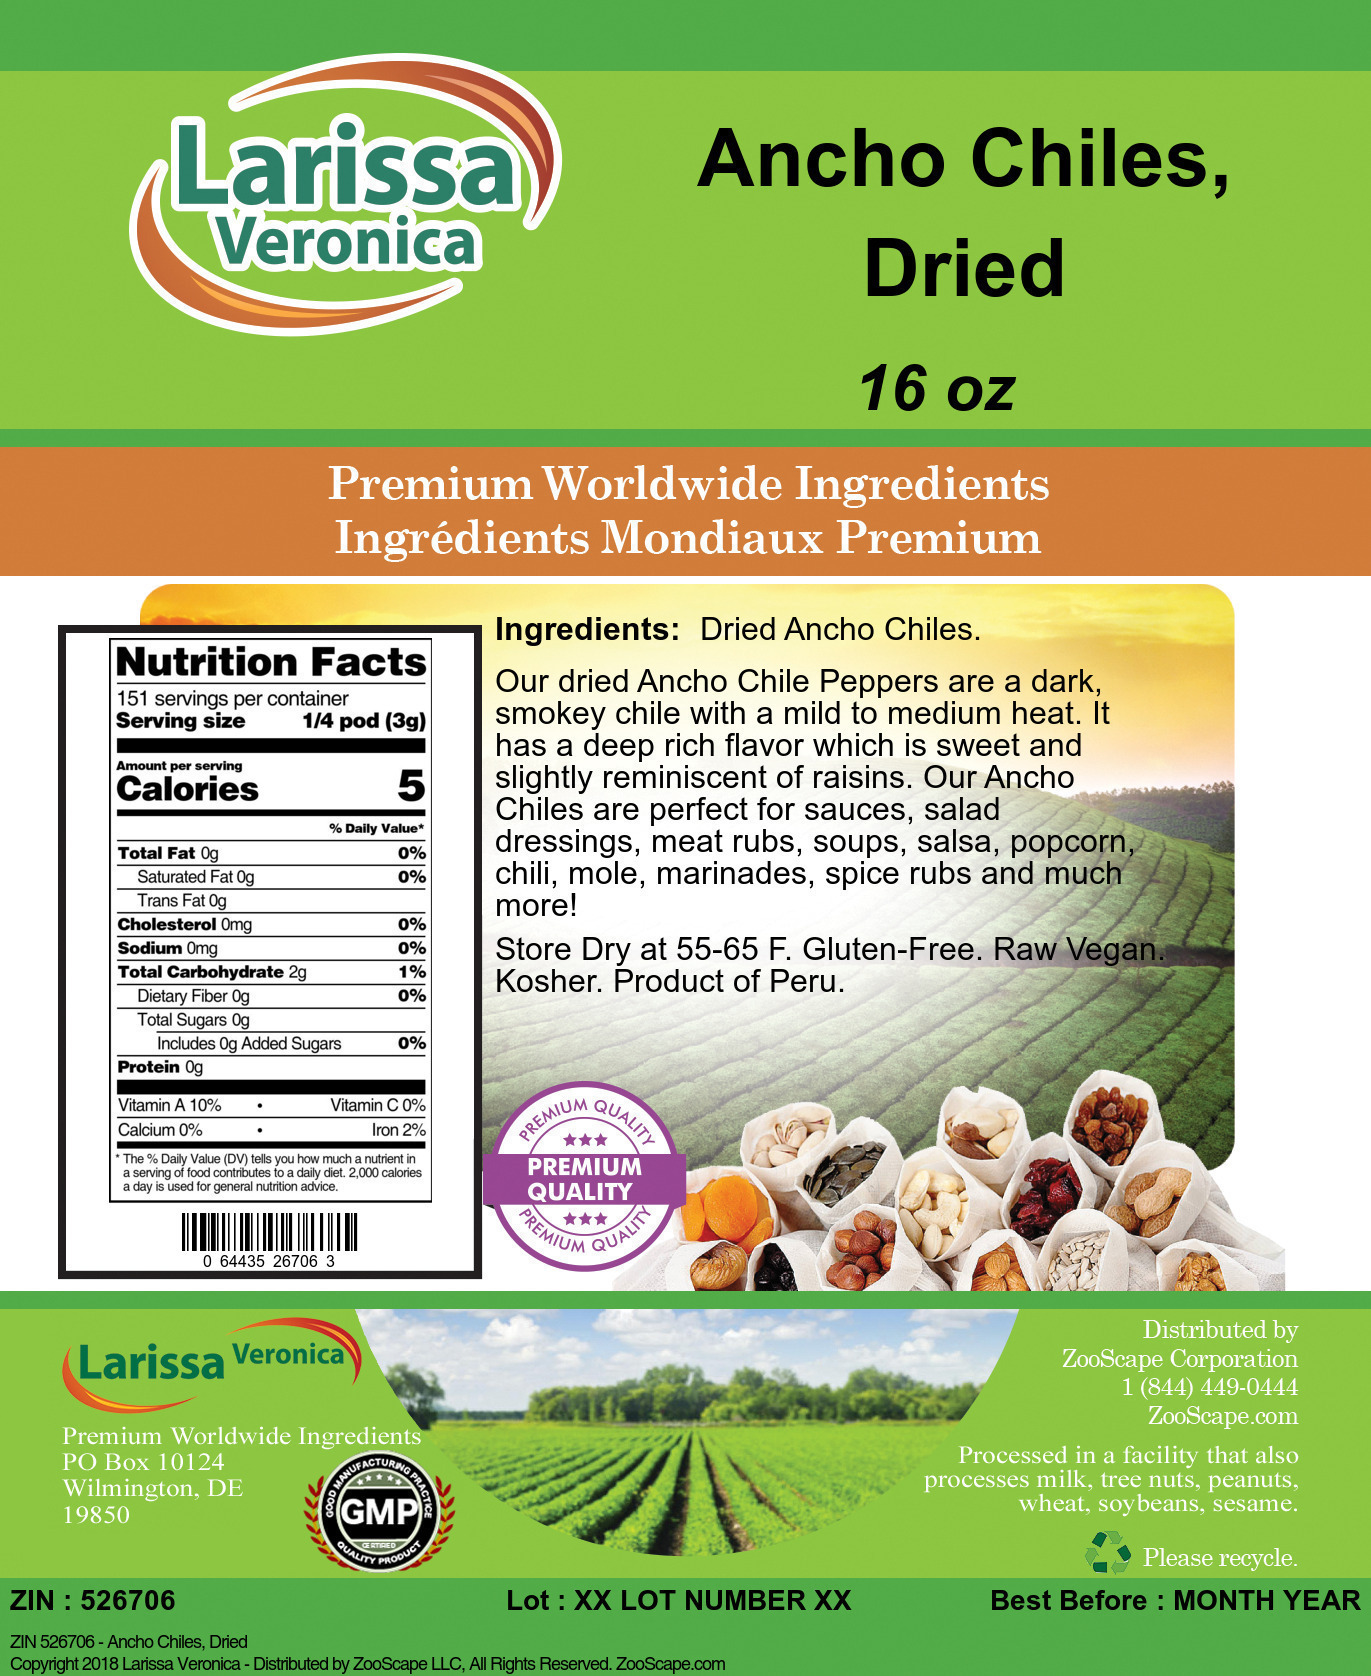 Ancho Chiles, Dried - Label